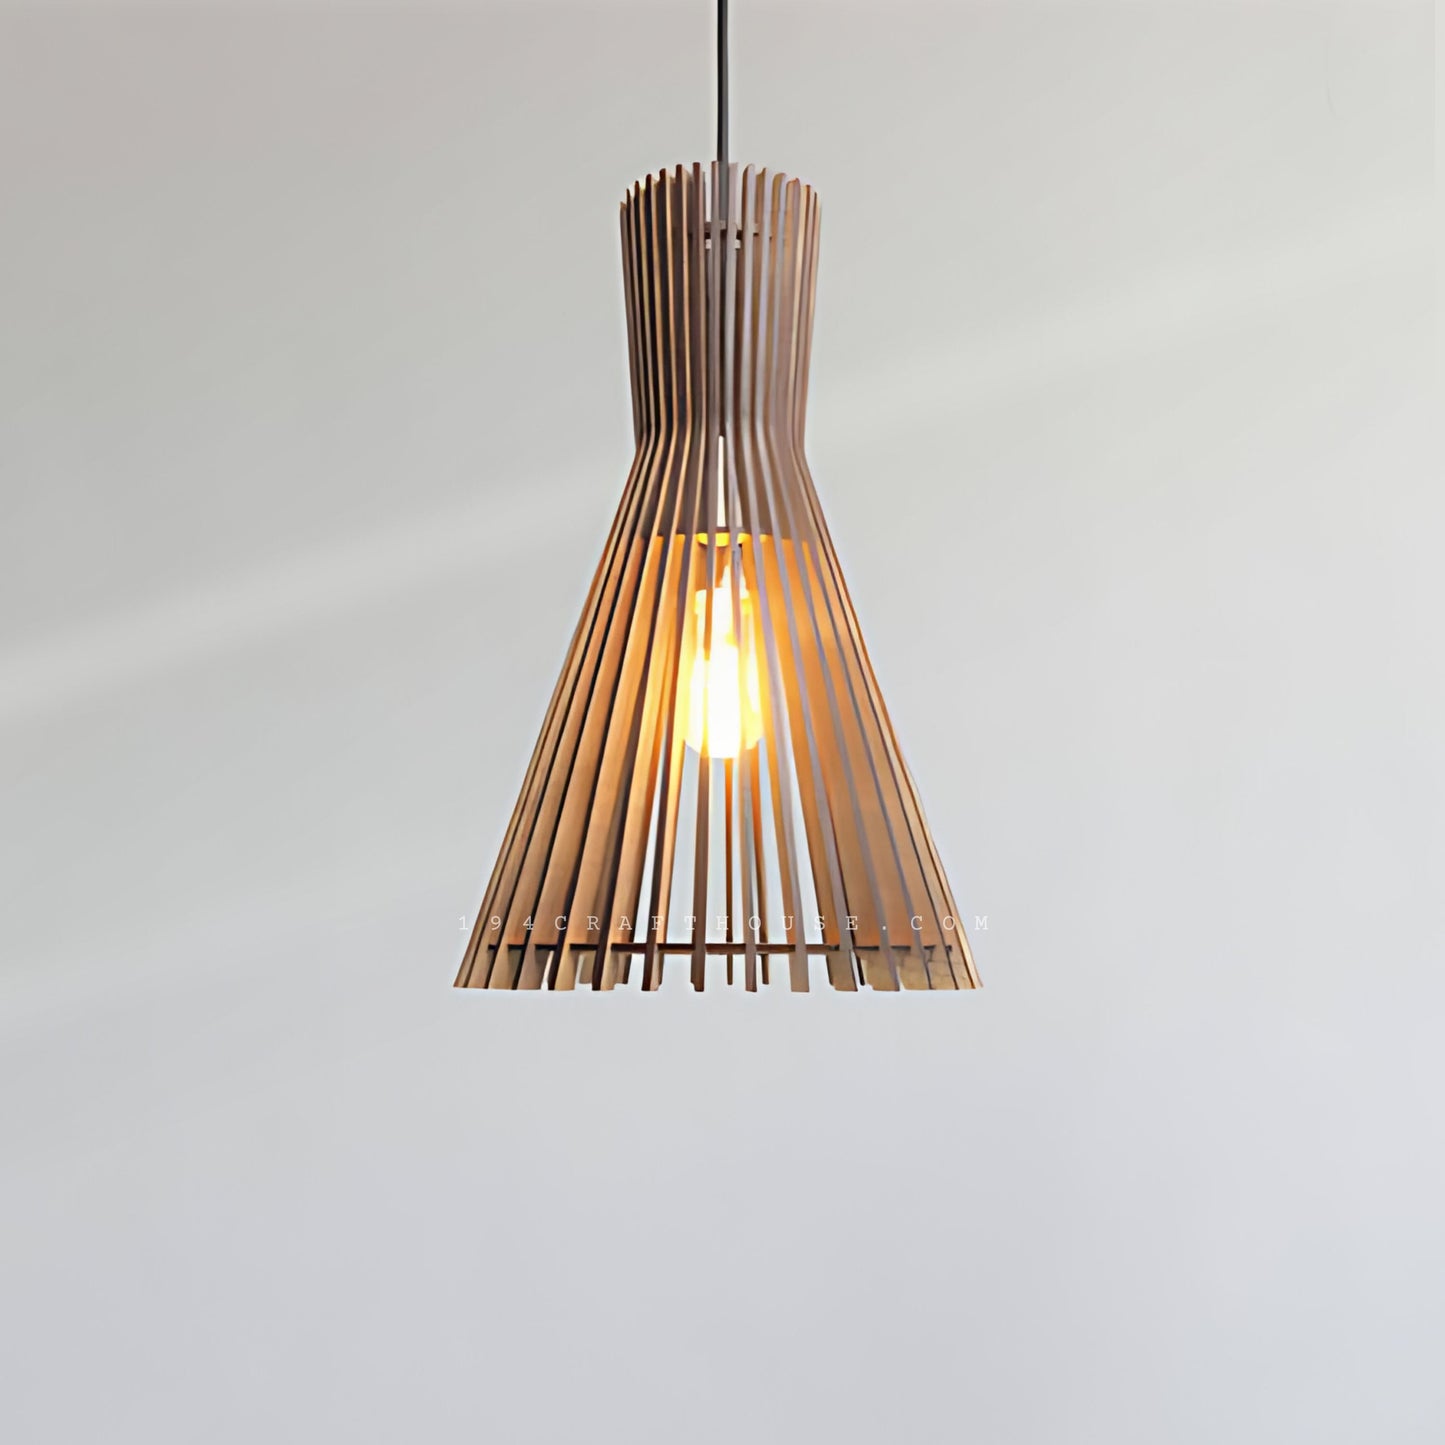 Wood Cage Pendant Light For Kitchen, Scandinavian Style Ceiling Lampshade Suspension